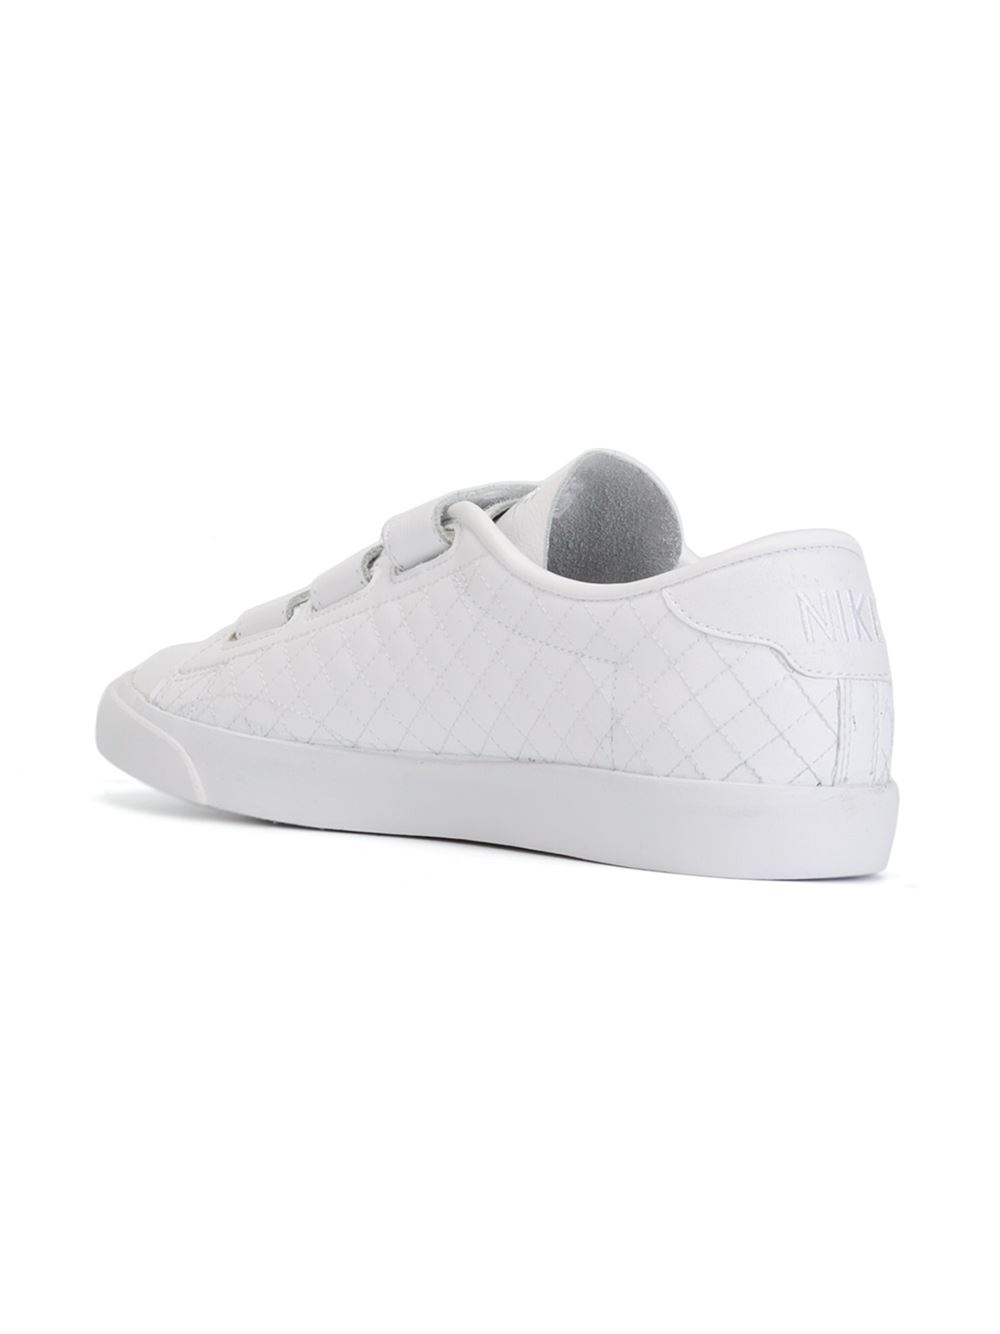 Nike Leather Tennis Classic AC V Low-Top Sneakers in White for Men - Lyst